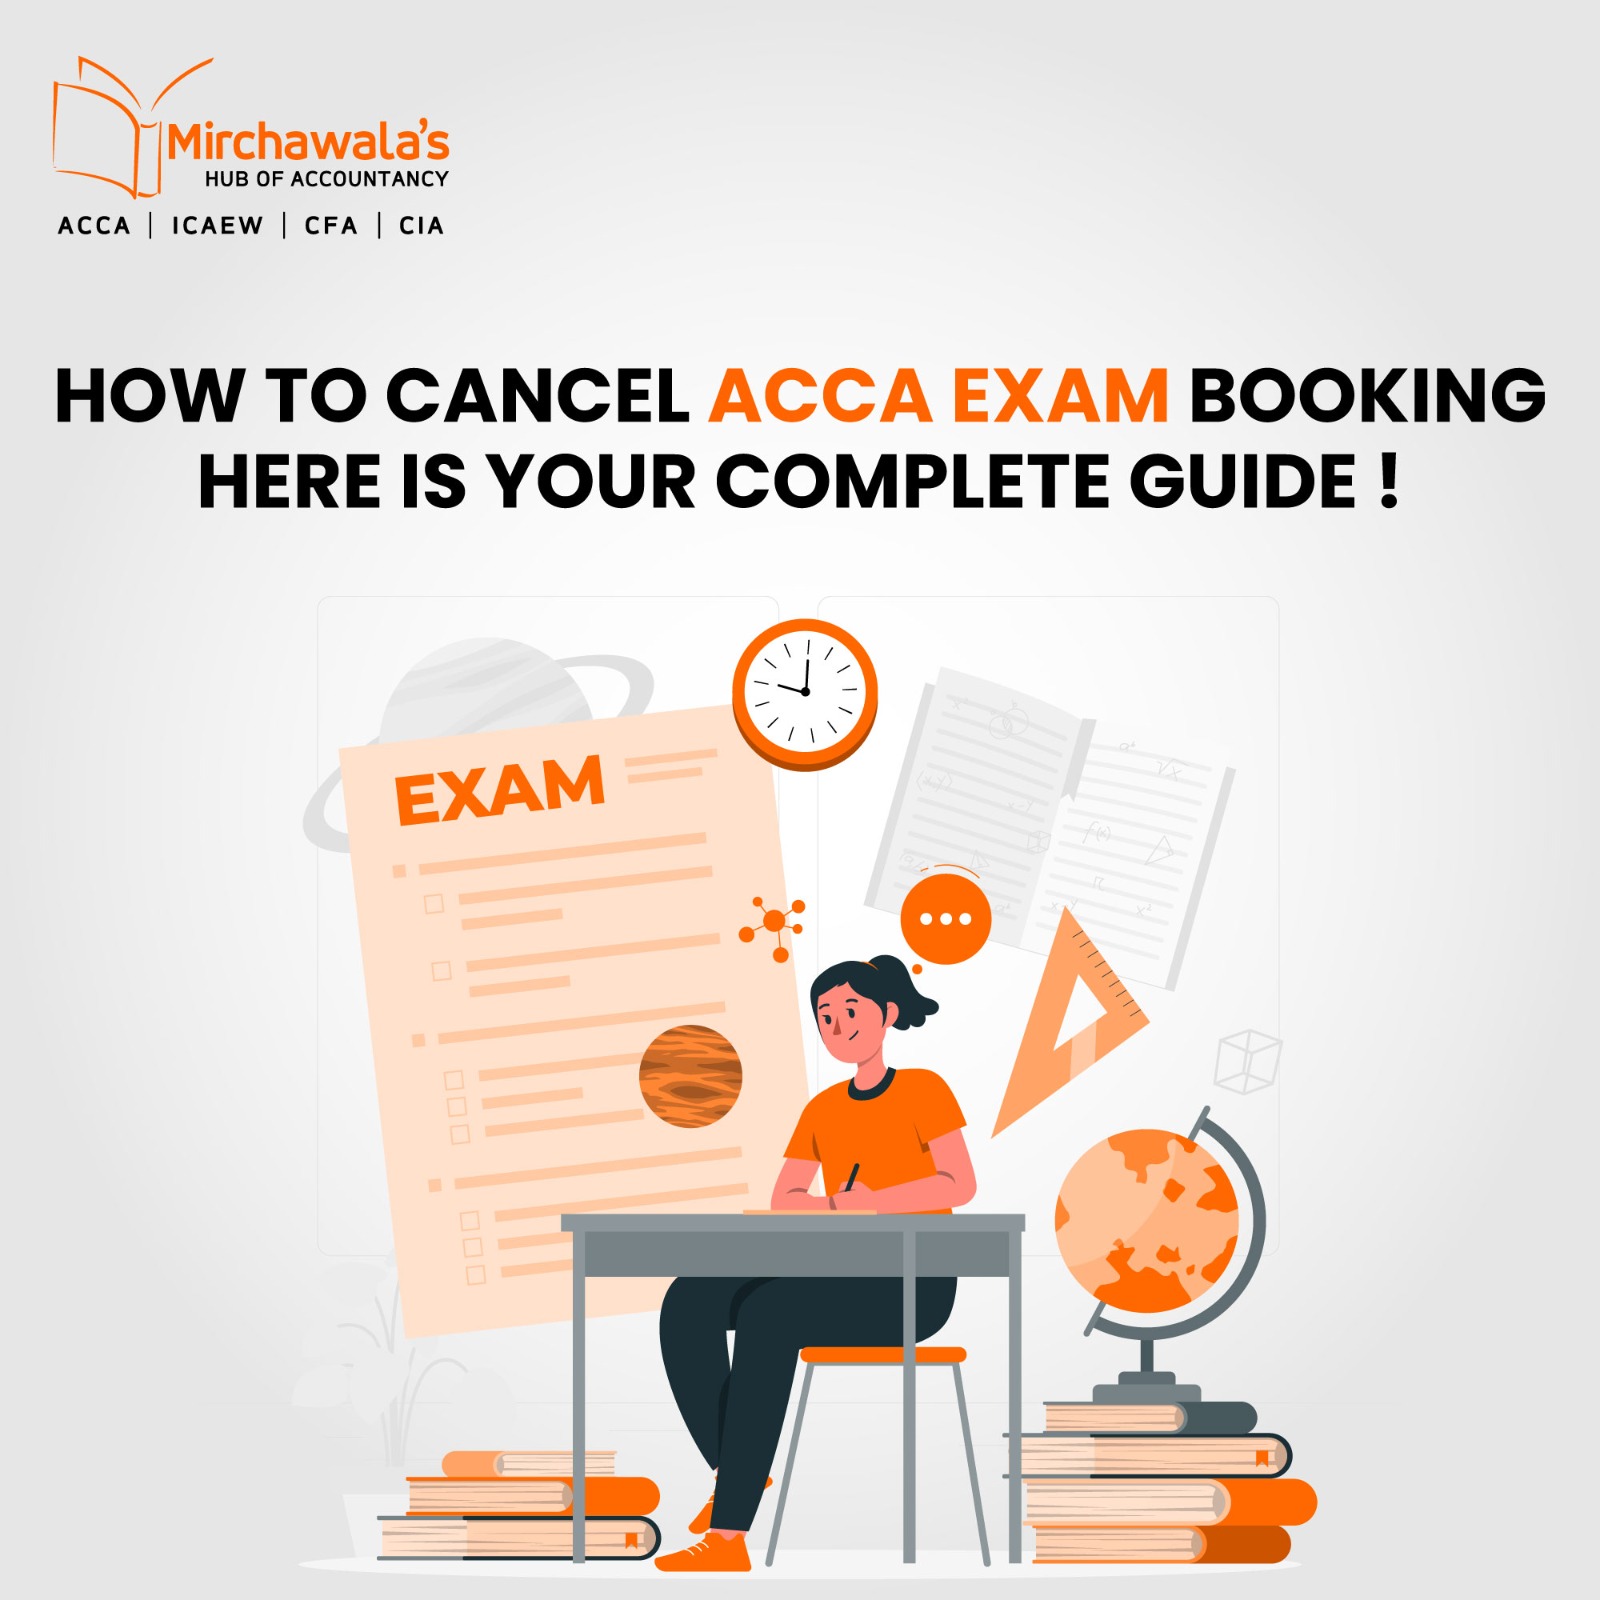 How to Cancel ACCA Exam Booking: Here is Your Complete Guide